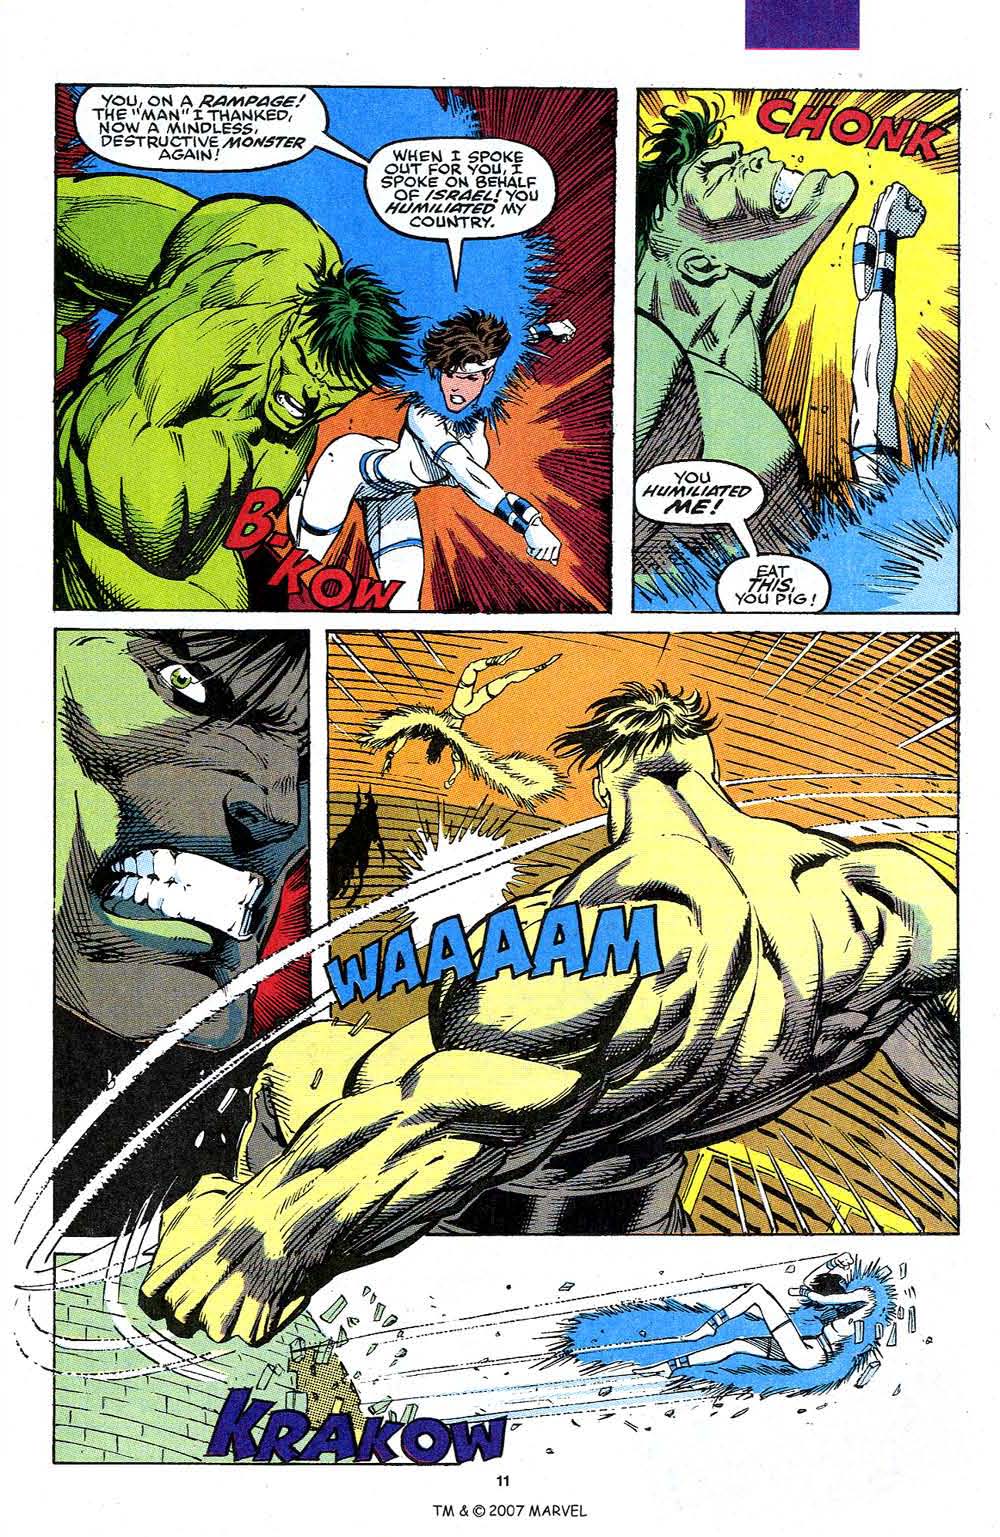 The Incredible Hulk Vol. 1 Issue #387 "Hiding Behind Mosques" (1991), Marvel Comics. Words by Peter David. Art by Dale Keown, Joe Rubinstein, and Glynis Oliver.